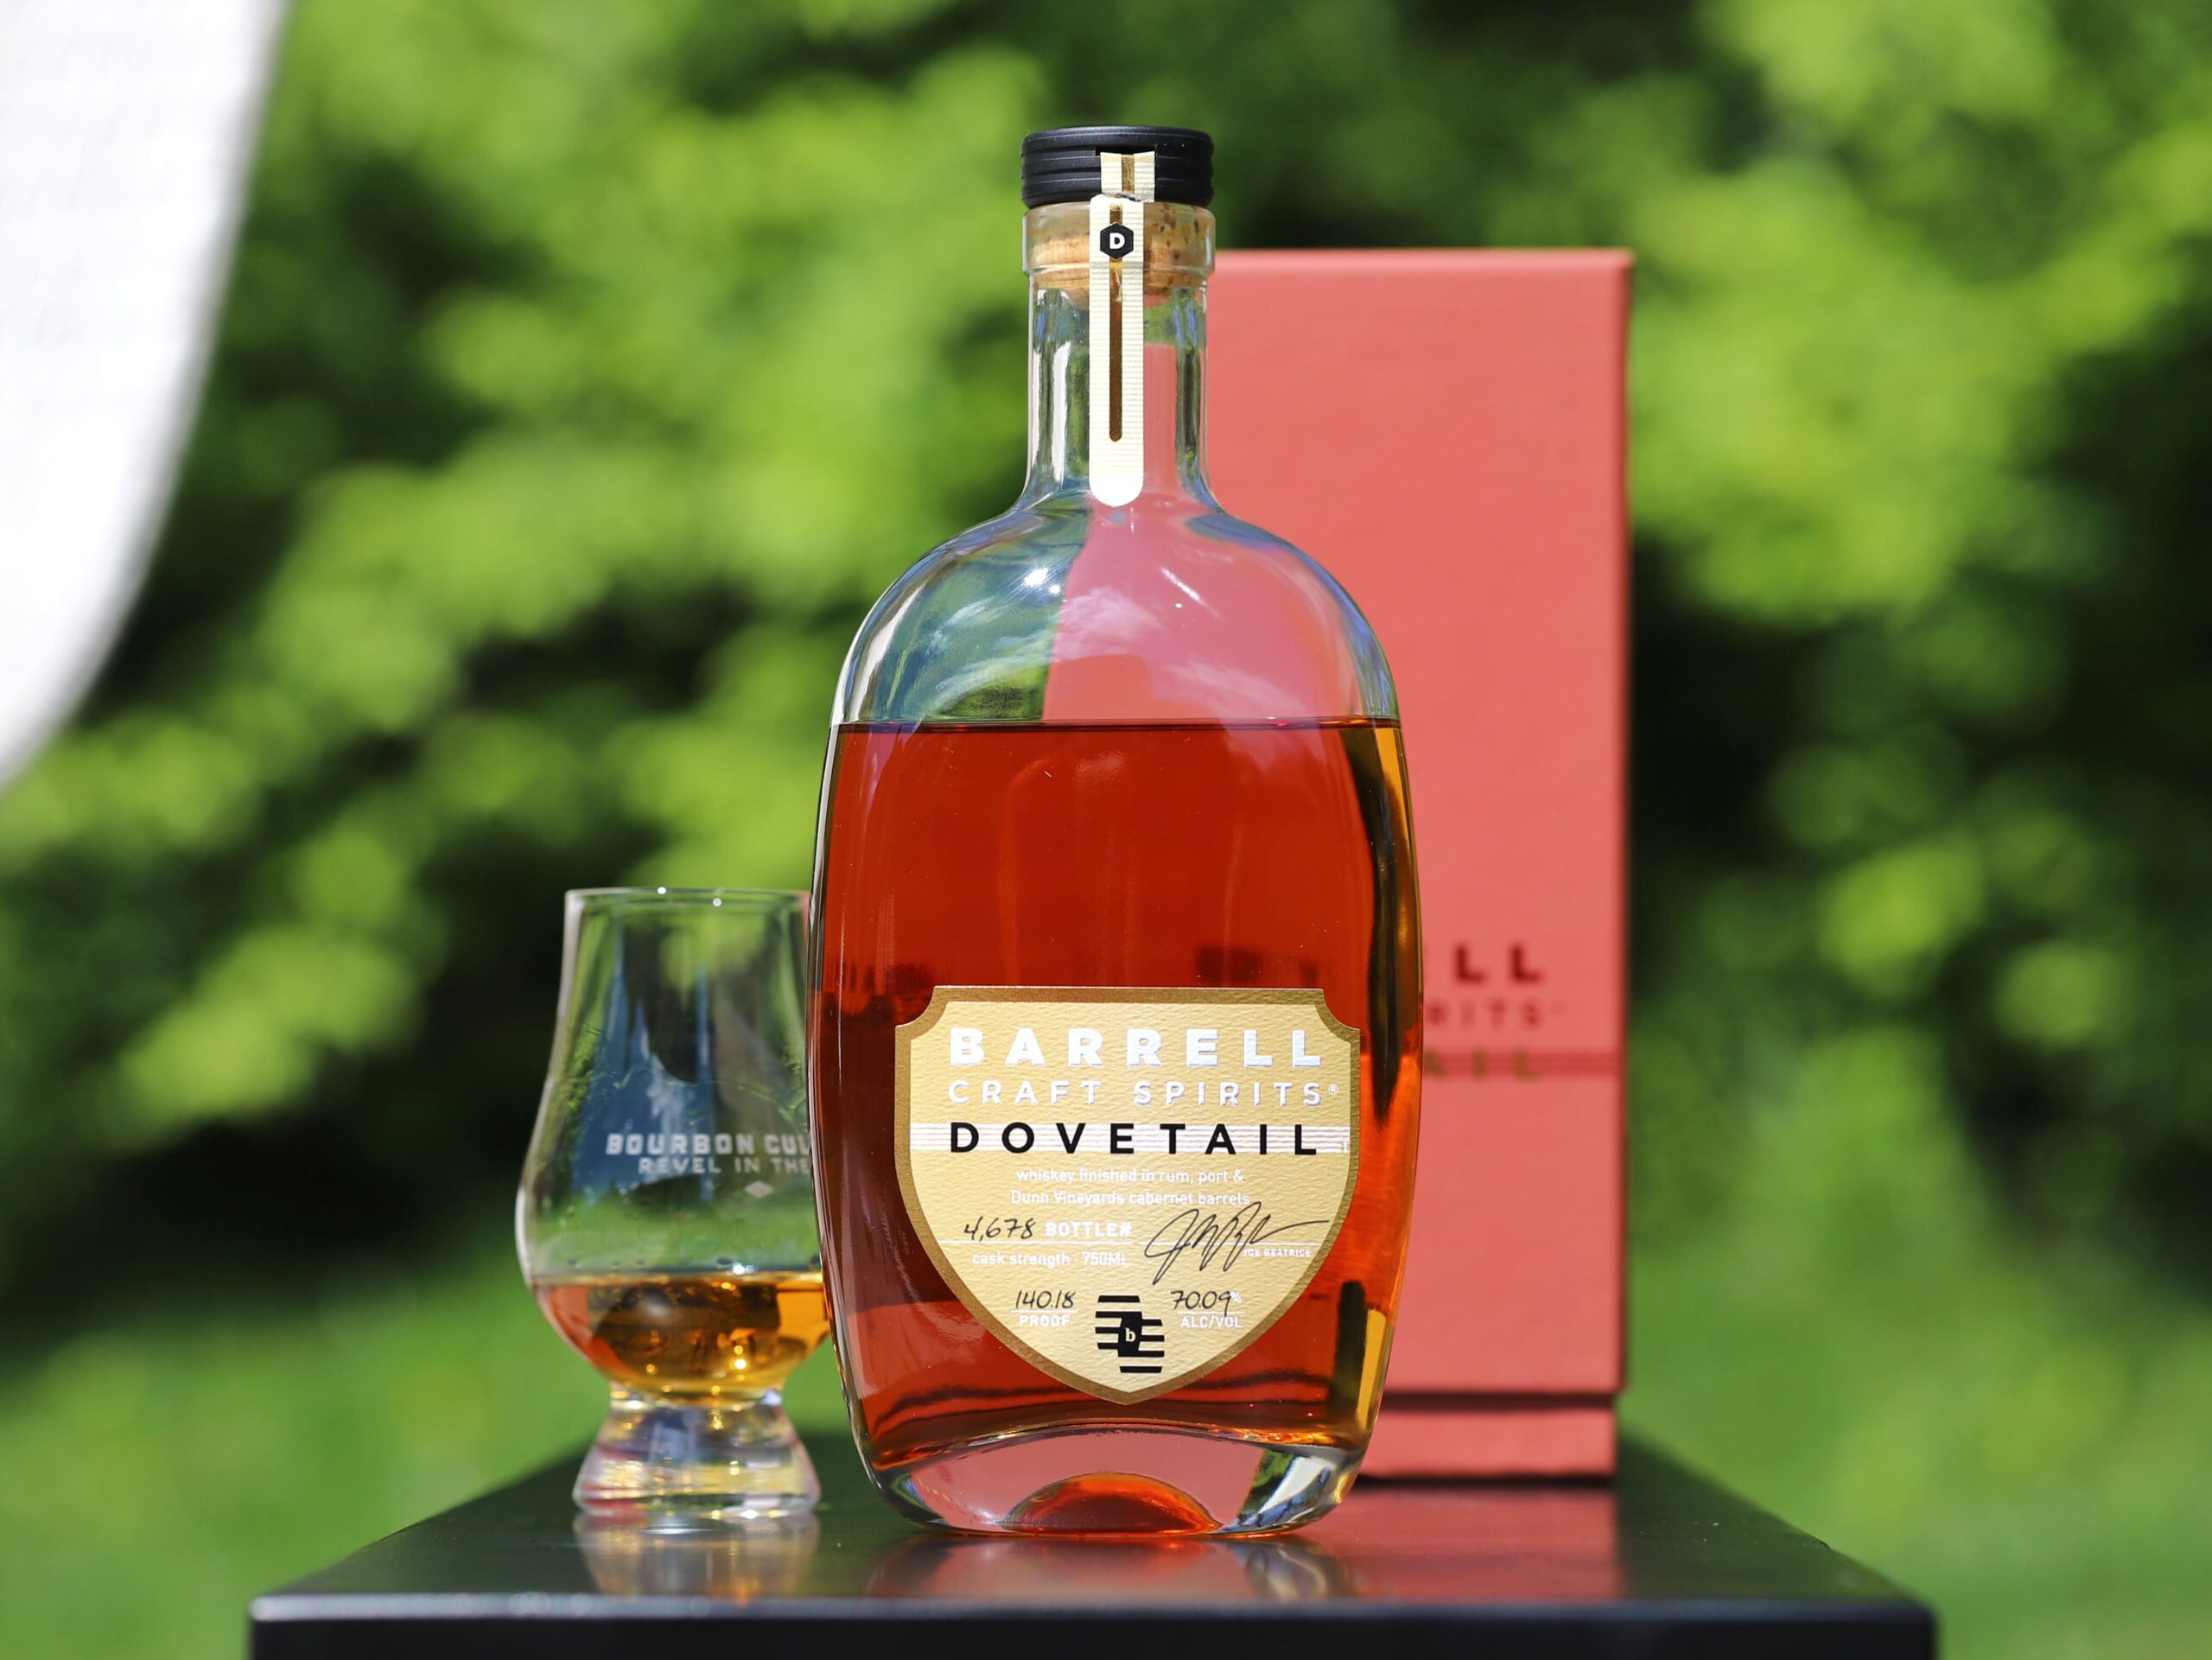 Barrell Craft Spirits Gold Label Dovetail Review